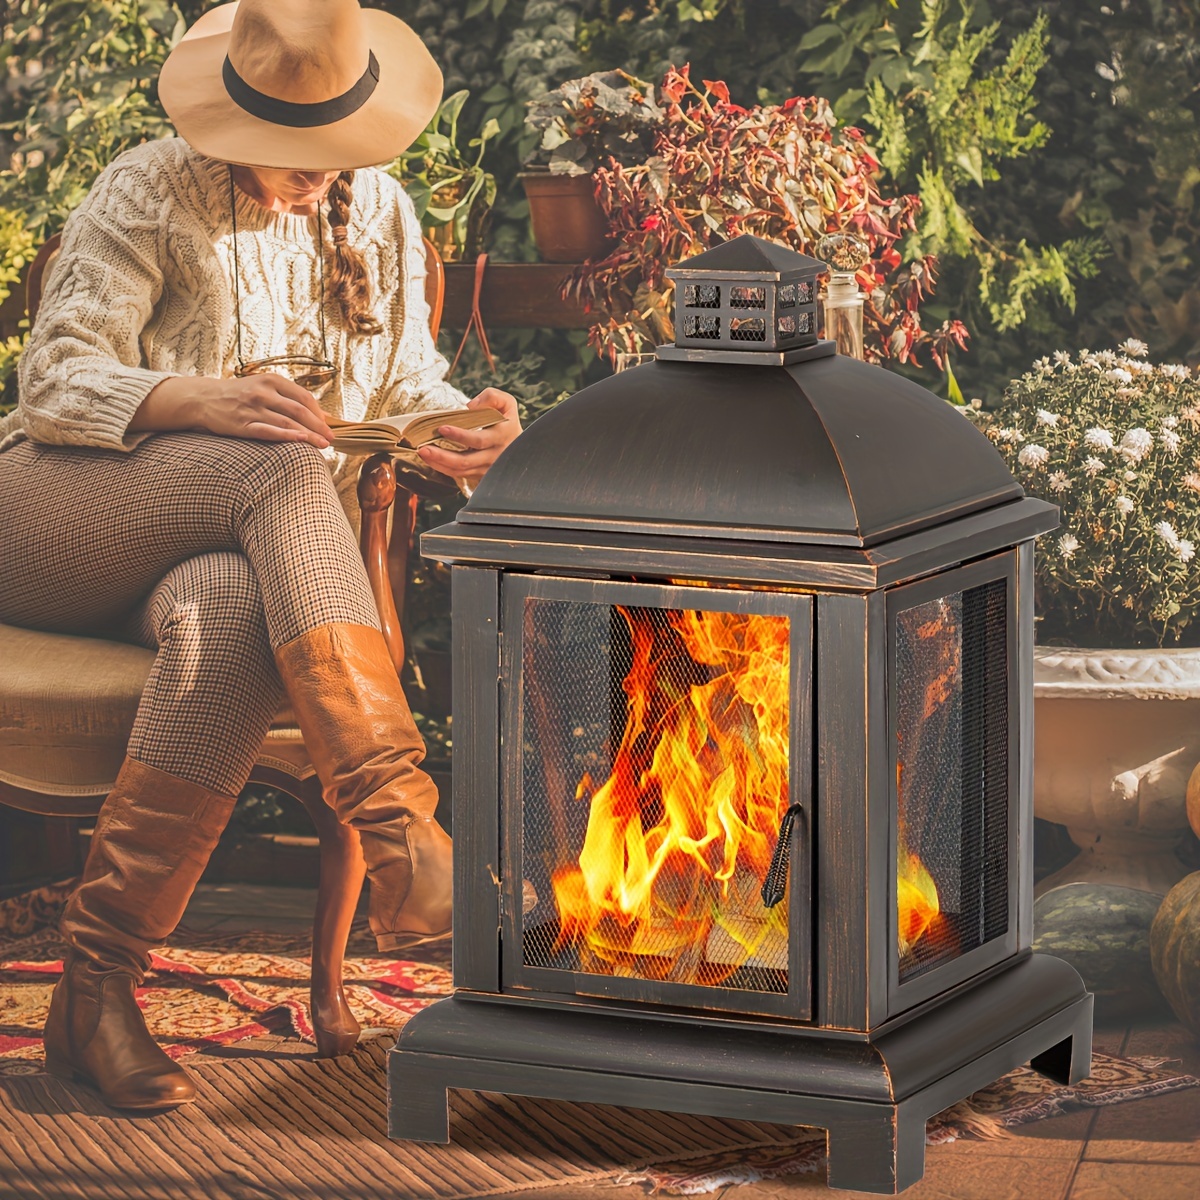 

1pc, Rustic Square Pagoda Fire Pit, Steel Outdoor Fireplace With Cooking Grill, Ideal For Garden Bbq, Backyard, Courtyard Decor